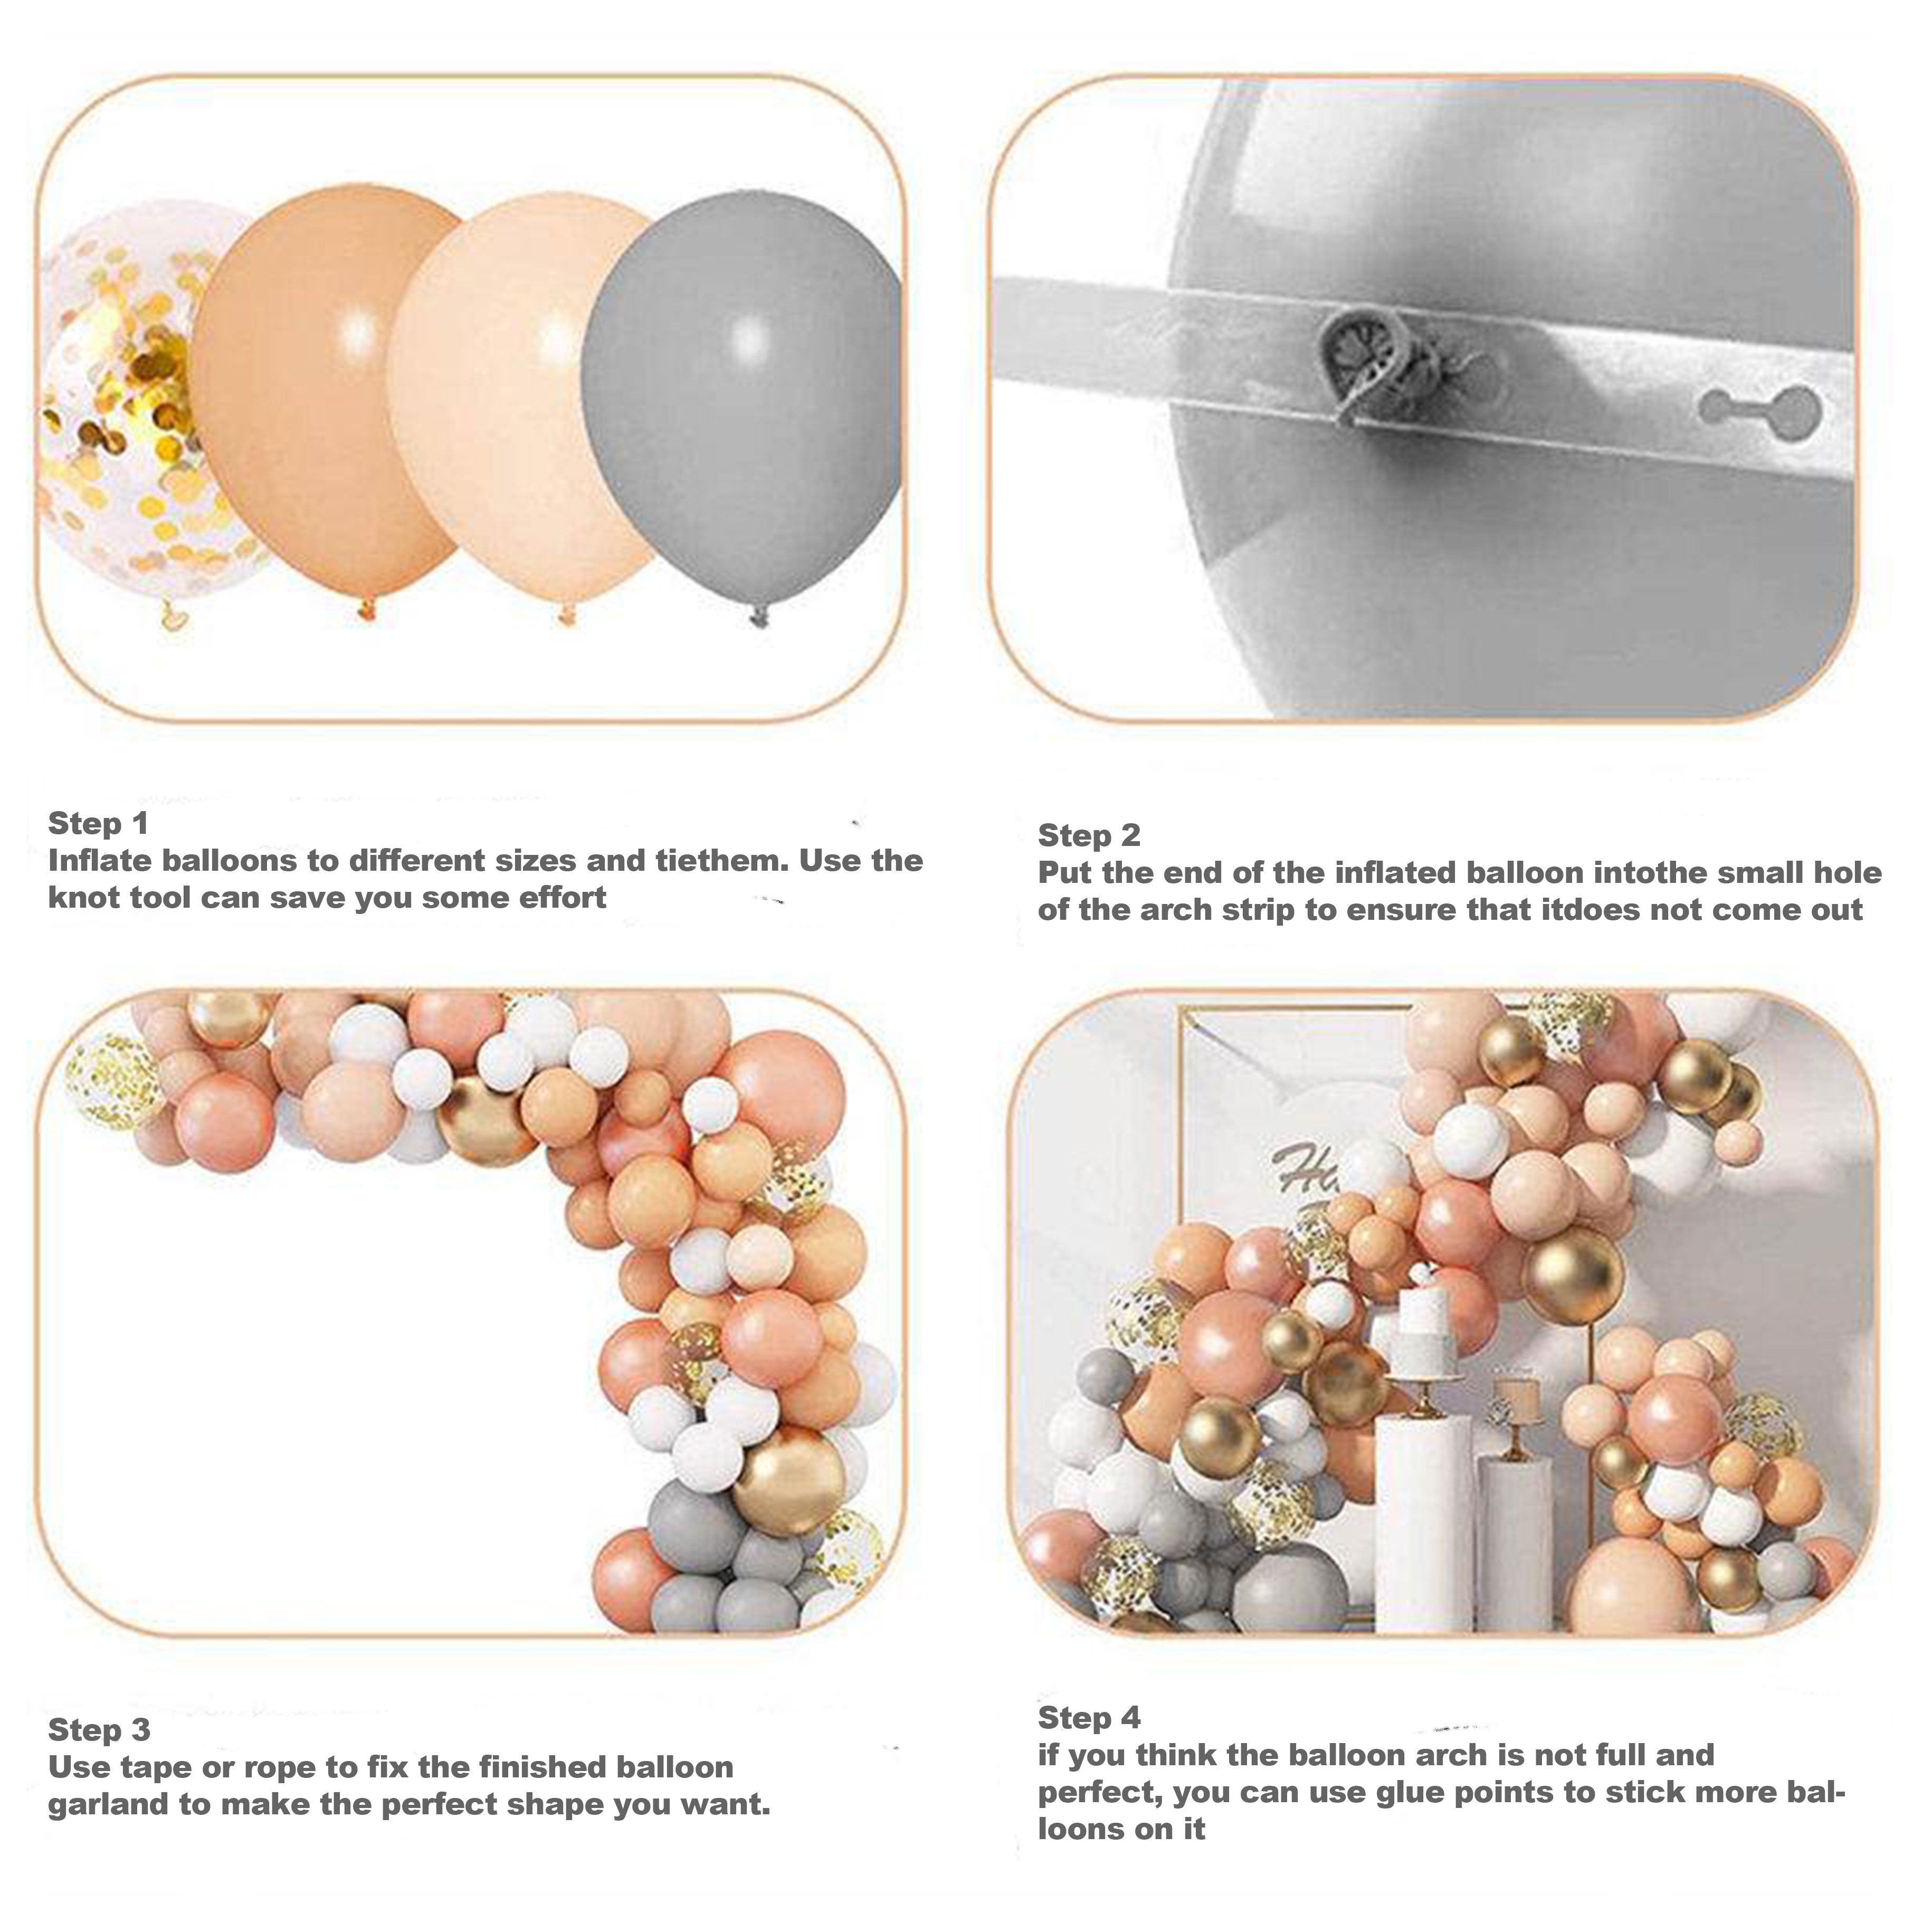 Rose Gold & Nude Balloon Decoration Set - Elegant Rose Gold and Nude Shades